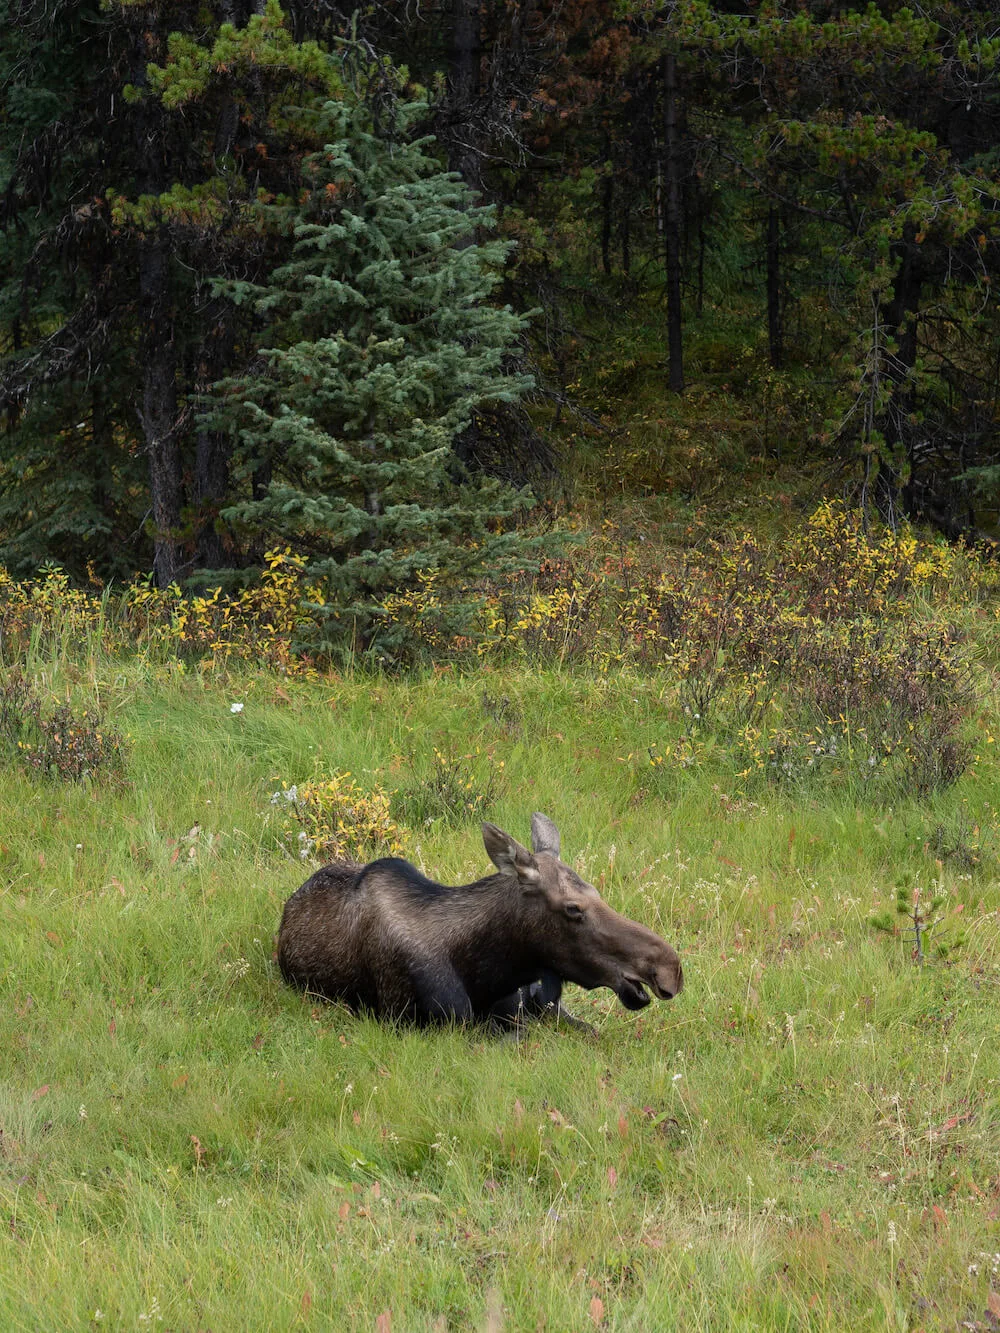 Planning a trip to Jasper National Park soon? Here's a local's guide to some of the best things to do in Jasper. From hikes and trails to adventure sports, family friendly excursions, dining experiences and more. You won't want to miss this guide of the best things to do and places to see in Jasper. Pictured here: Moose along Maligne Lake Road